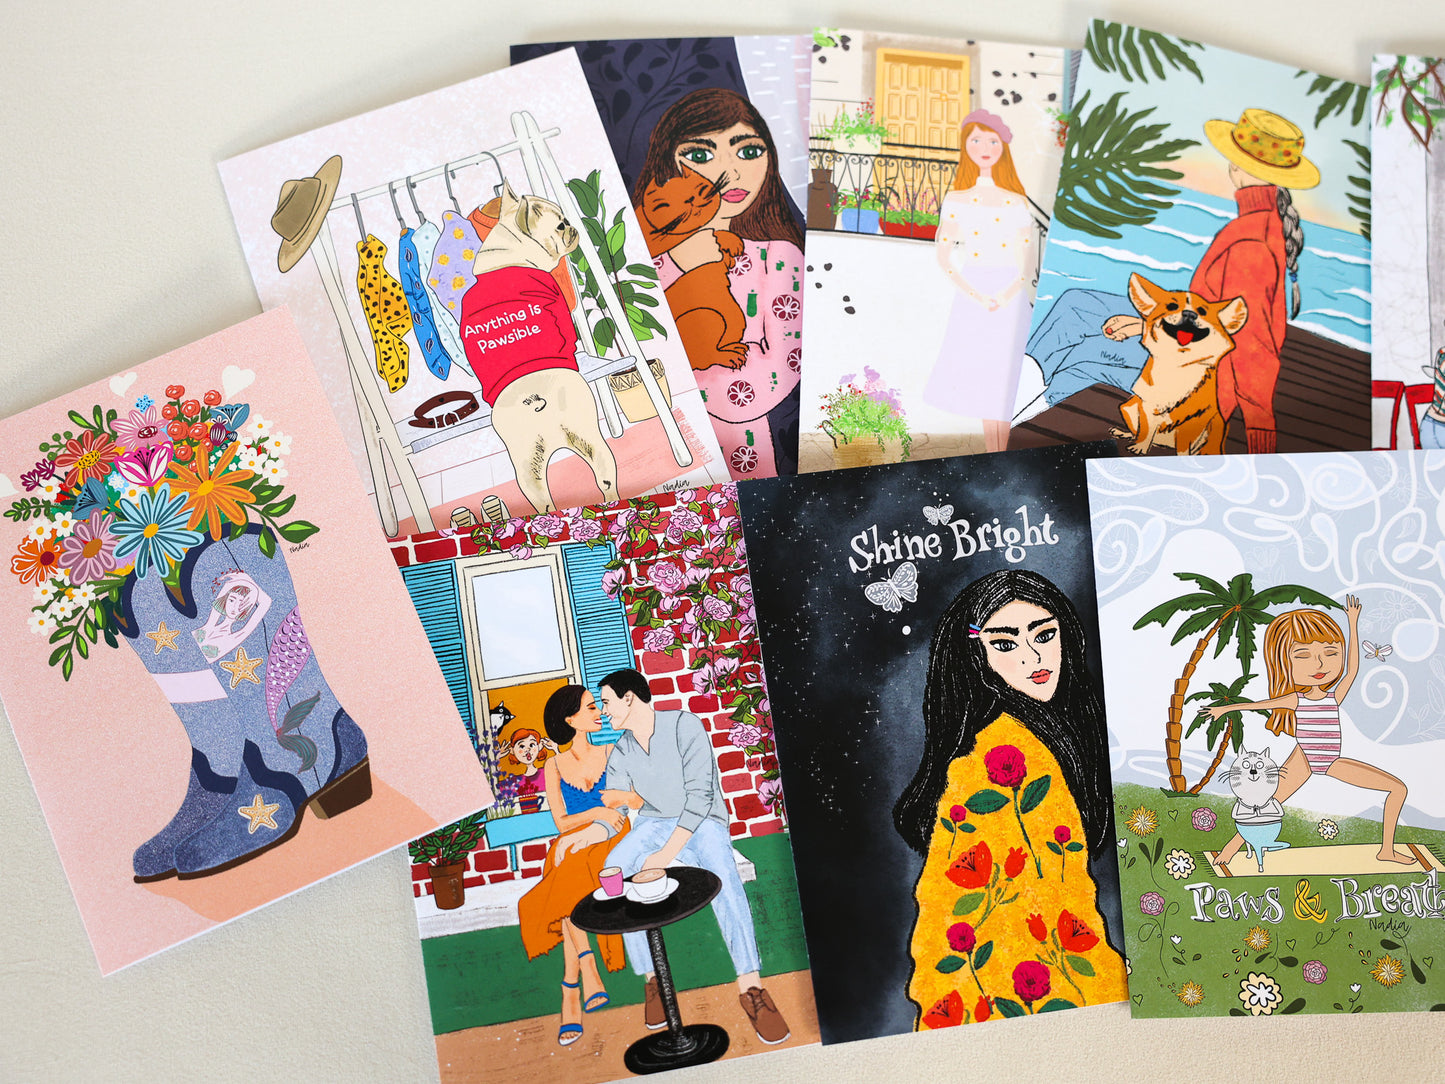 Handmade hand-drawn greeting cards by North Shore Girls